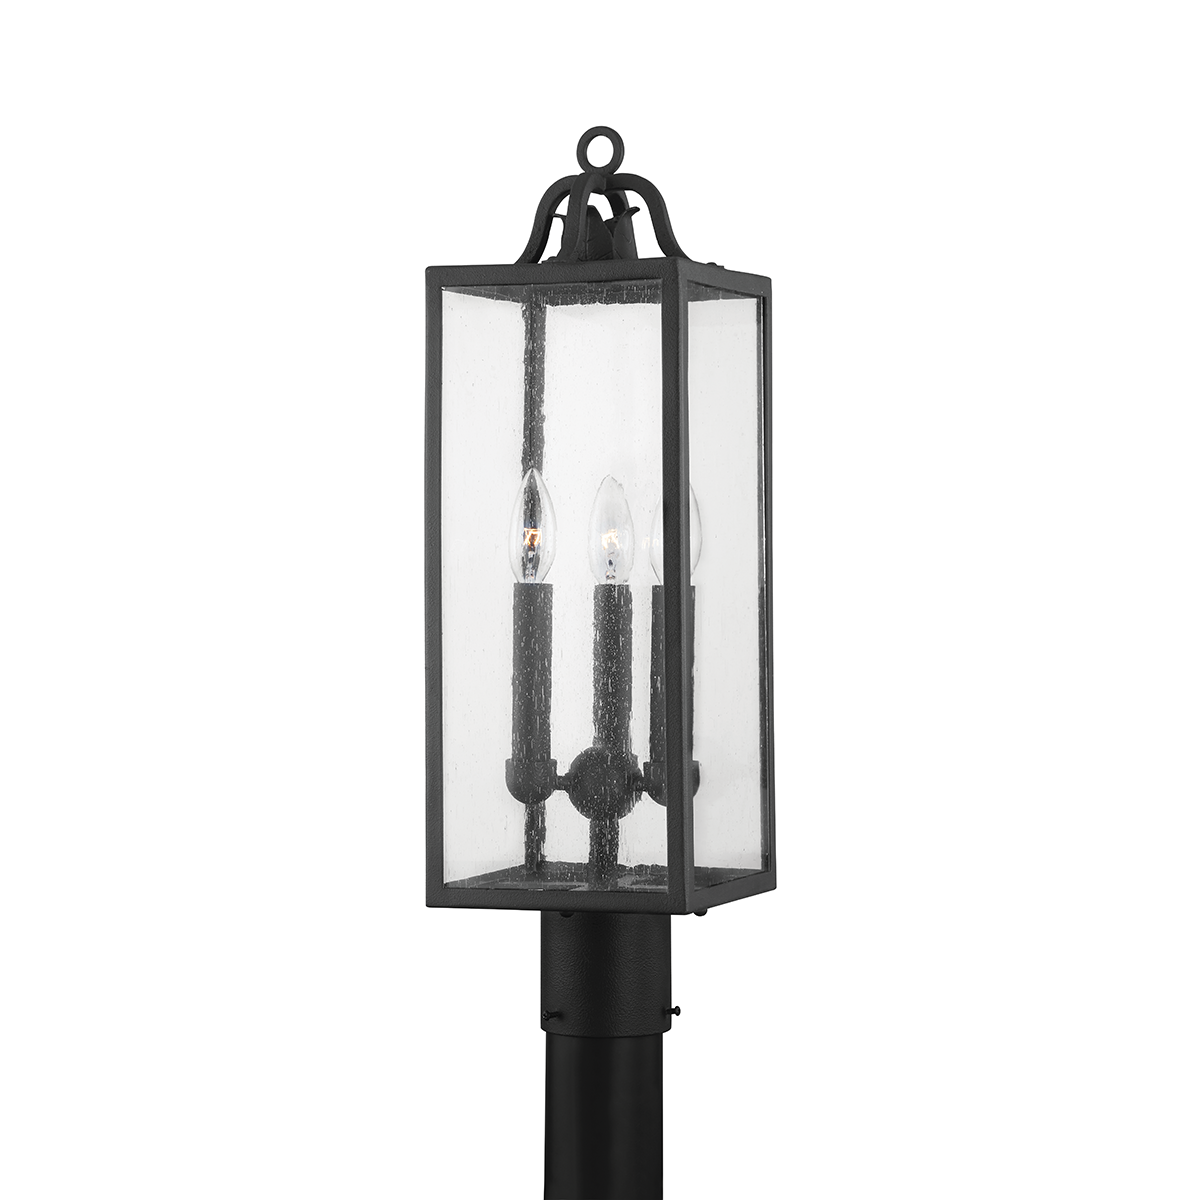 Troy Lighting 3 LIGHT EXTERIOR POST P2067 Outdoor l Post/Pier Mounts Troy Lighting FORGED IRON  